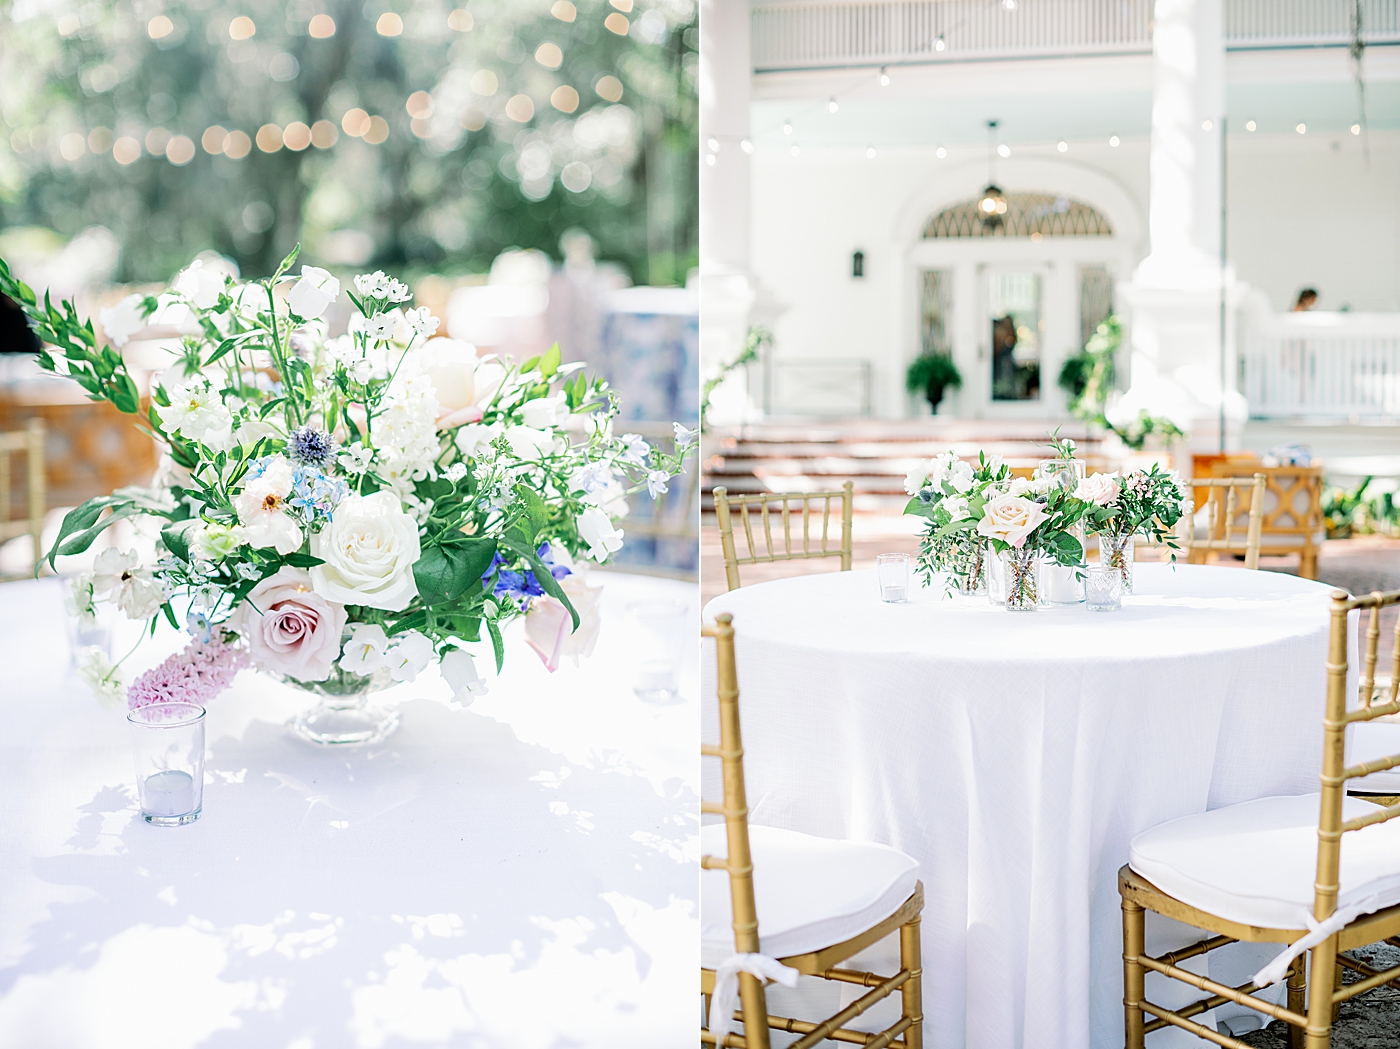 Reception details with flowers and tables during Elegant Grandmillenial Charleston Wedding | Images by Annie Laura Photography